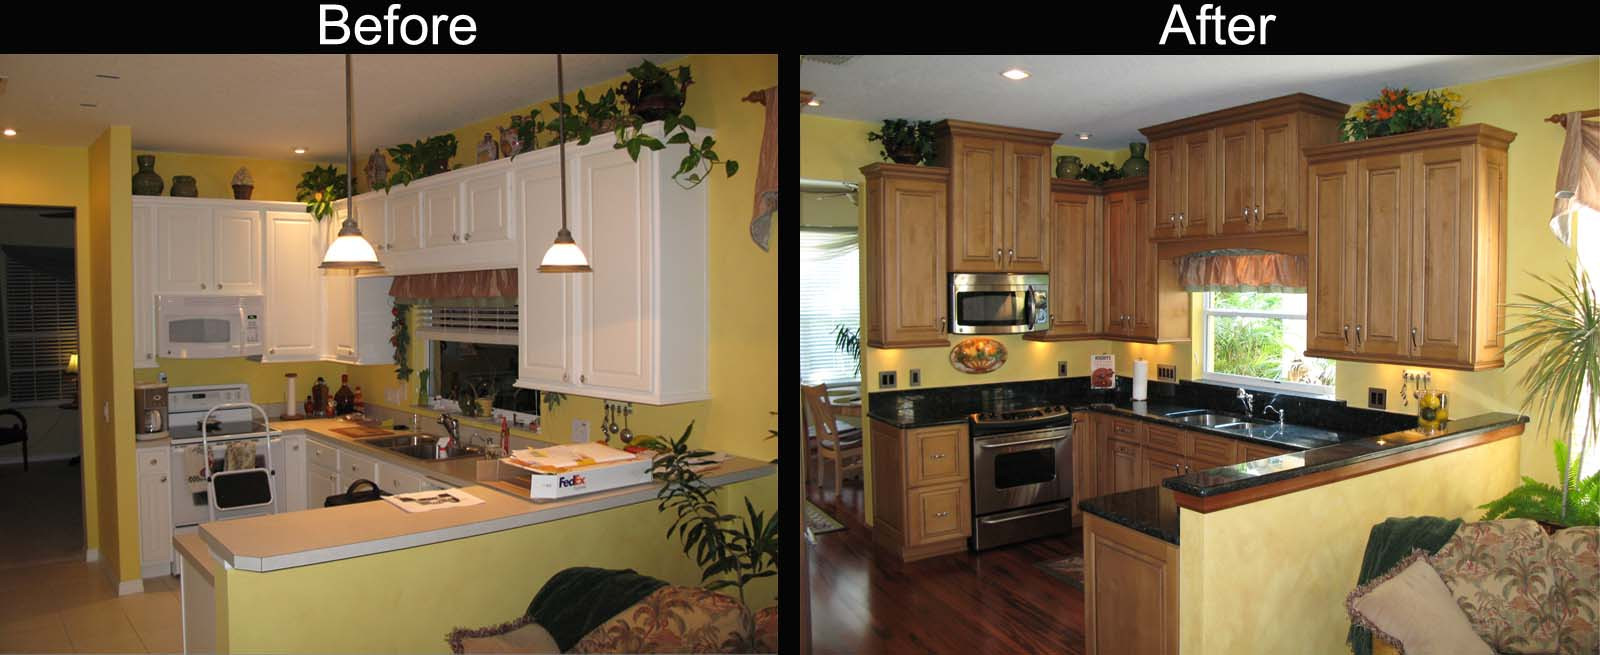 Kitchen Remodel Before And After
 Kitchen Decor Kitchen Remodel Before And After